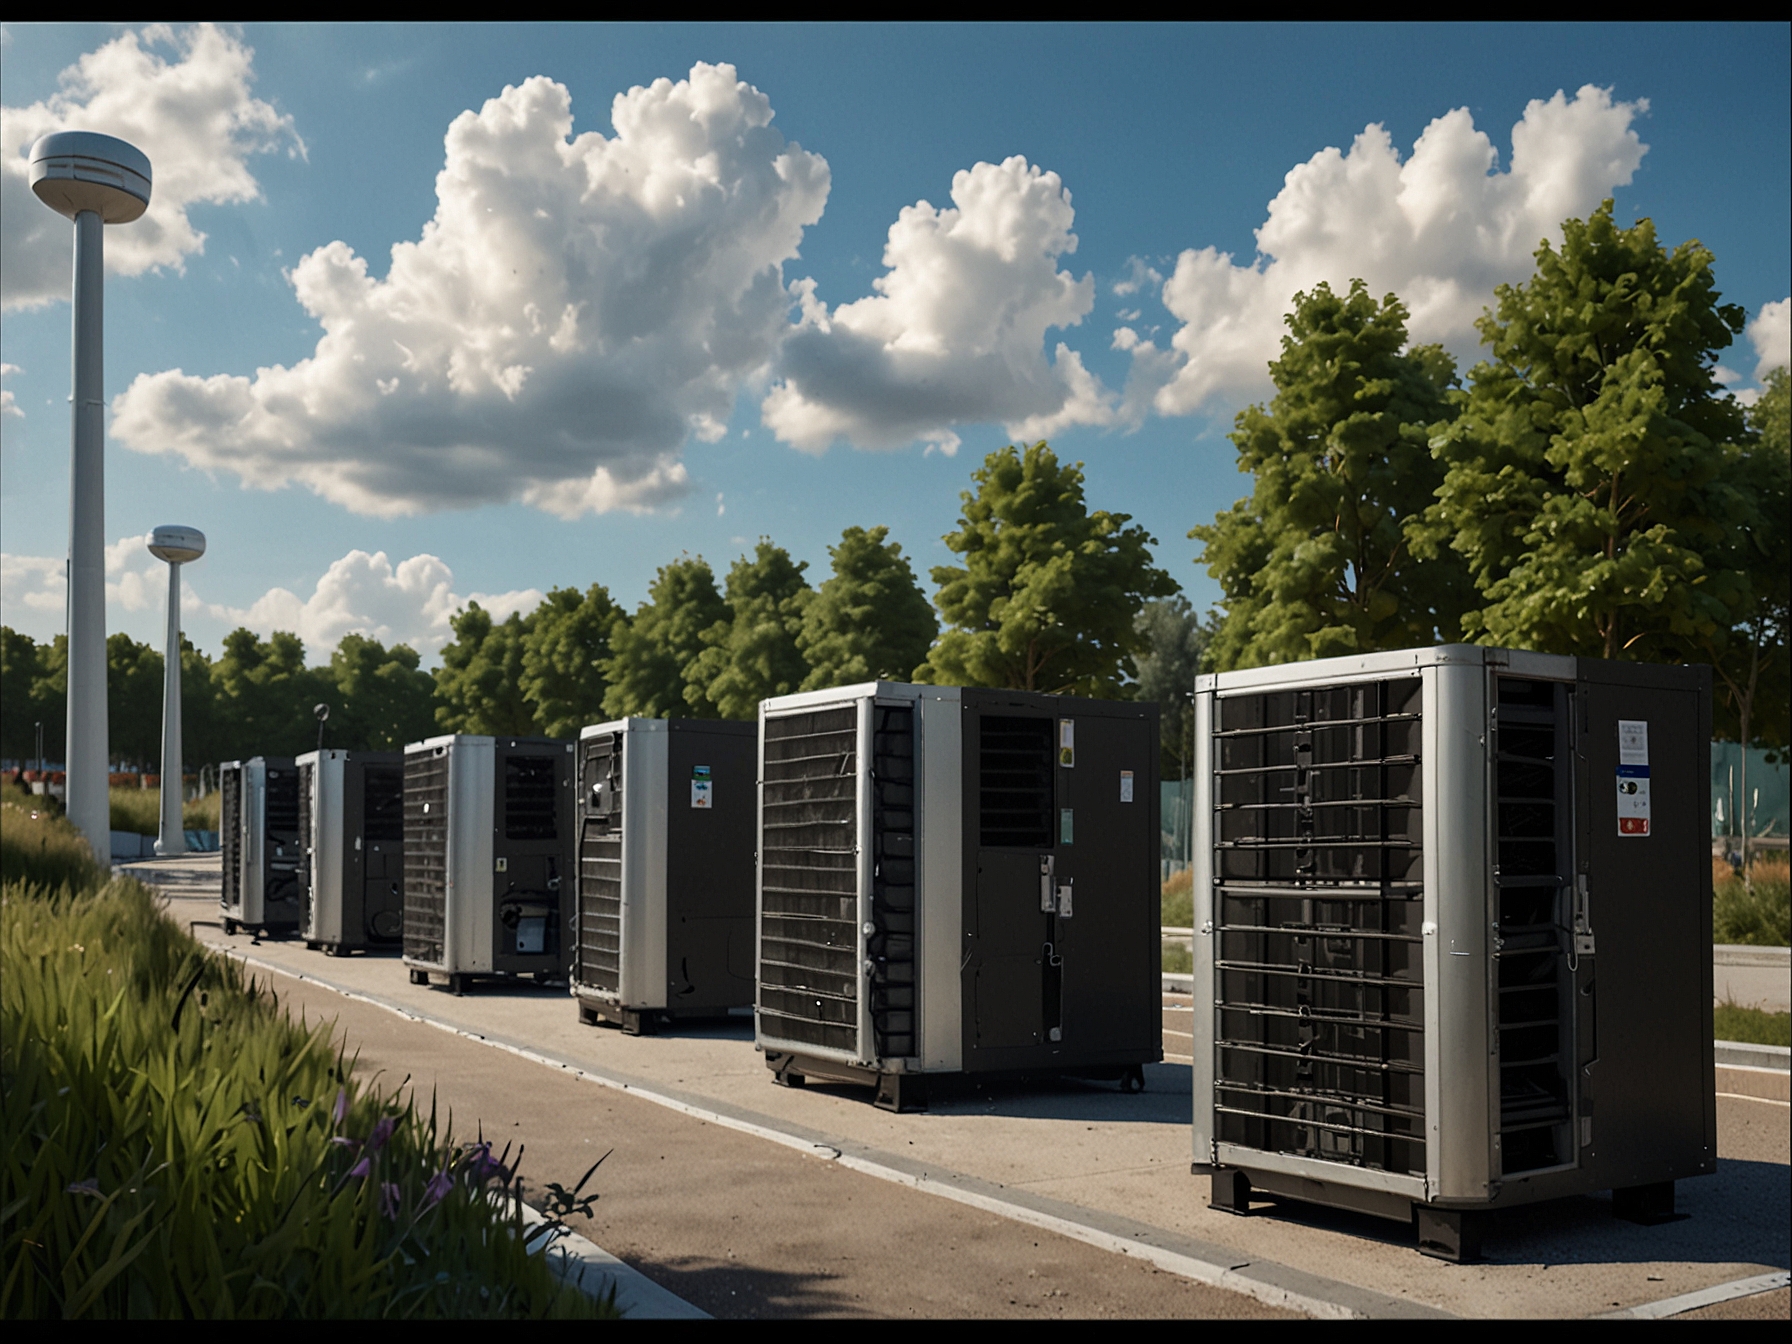 An image of temporary air conditioning units being installed at the athletes' village for the upcoming Paris 2024 Olympics, illustrating efforts to combat the anticipated summer heat and ensure athlete well-being.